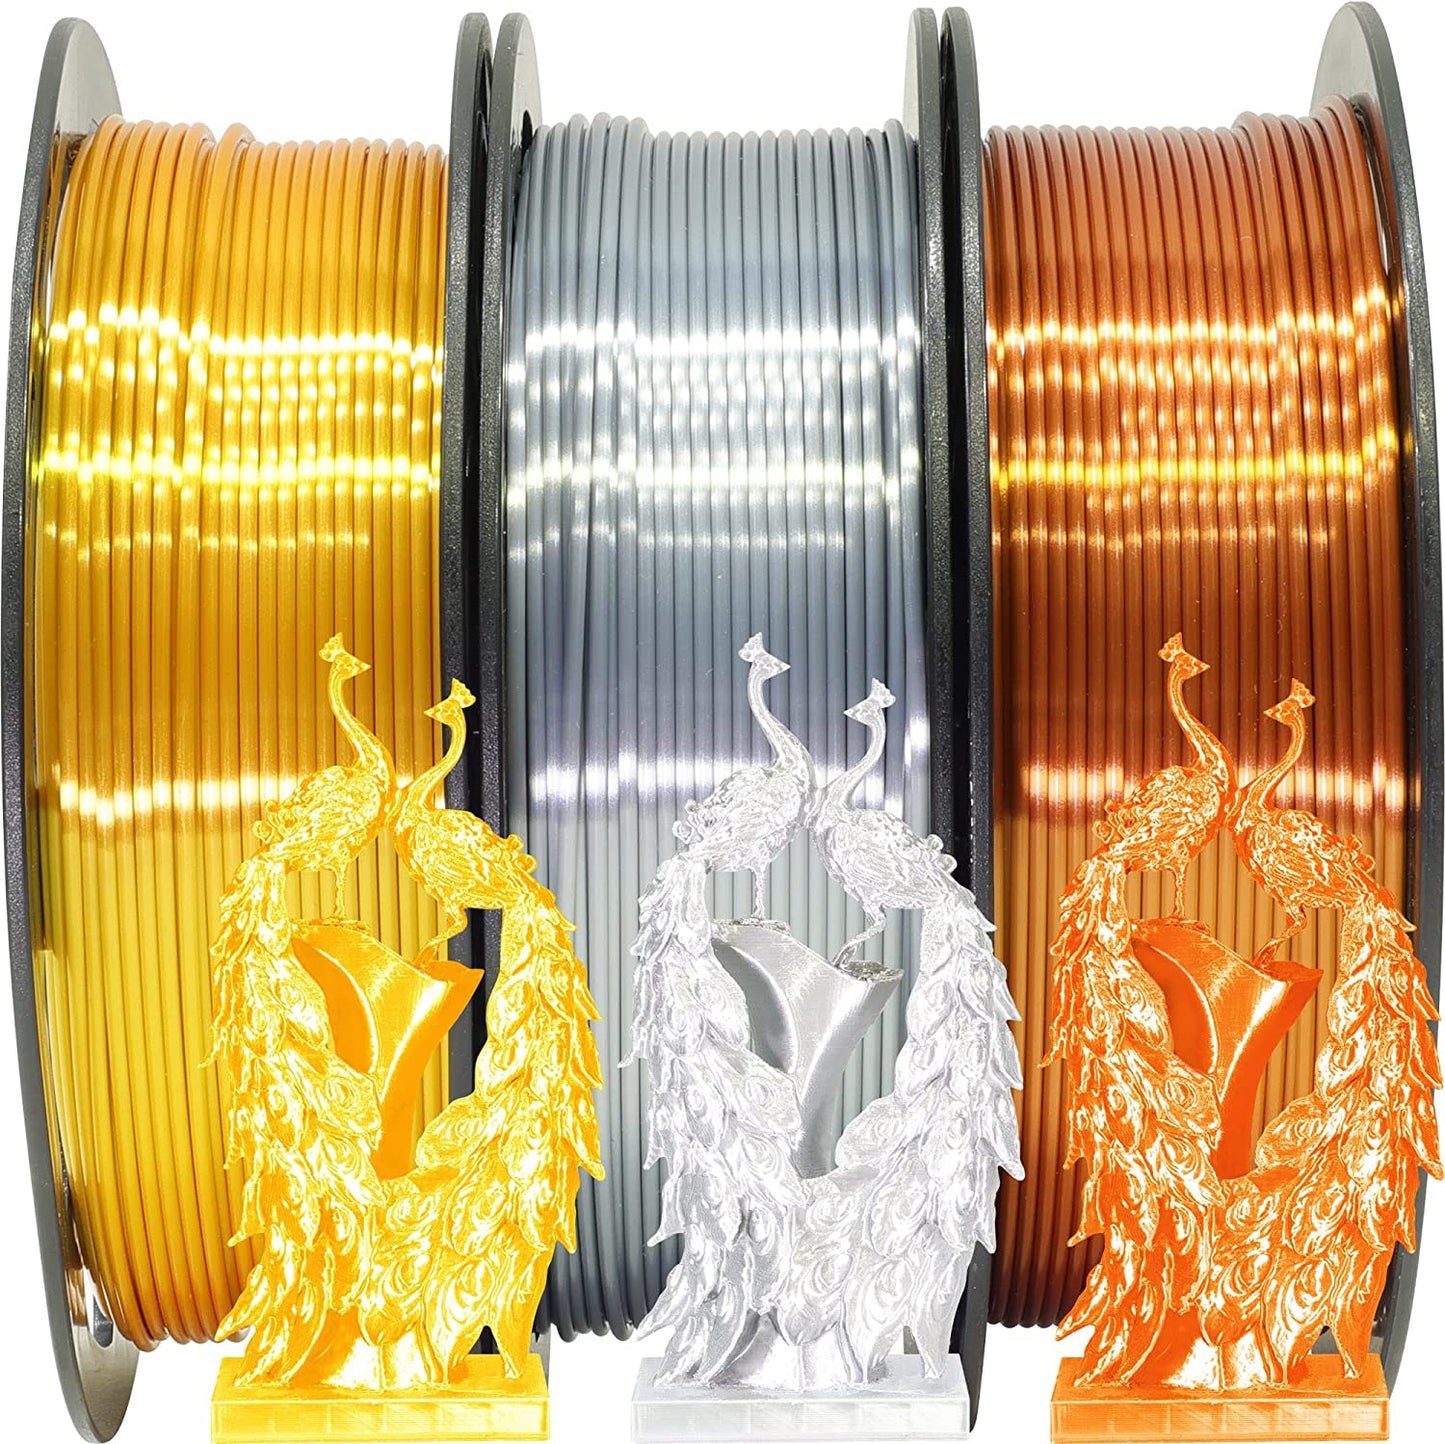 Shiny Silk Gold Silver Copper PLA Filament Bundle, 1.75Mm 3D Printer Filament, Each Spool 0.5Kg, 3 Spools Pack, with One 3D Printer Remove or Stick Tool